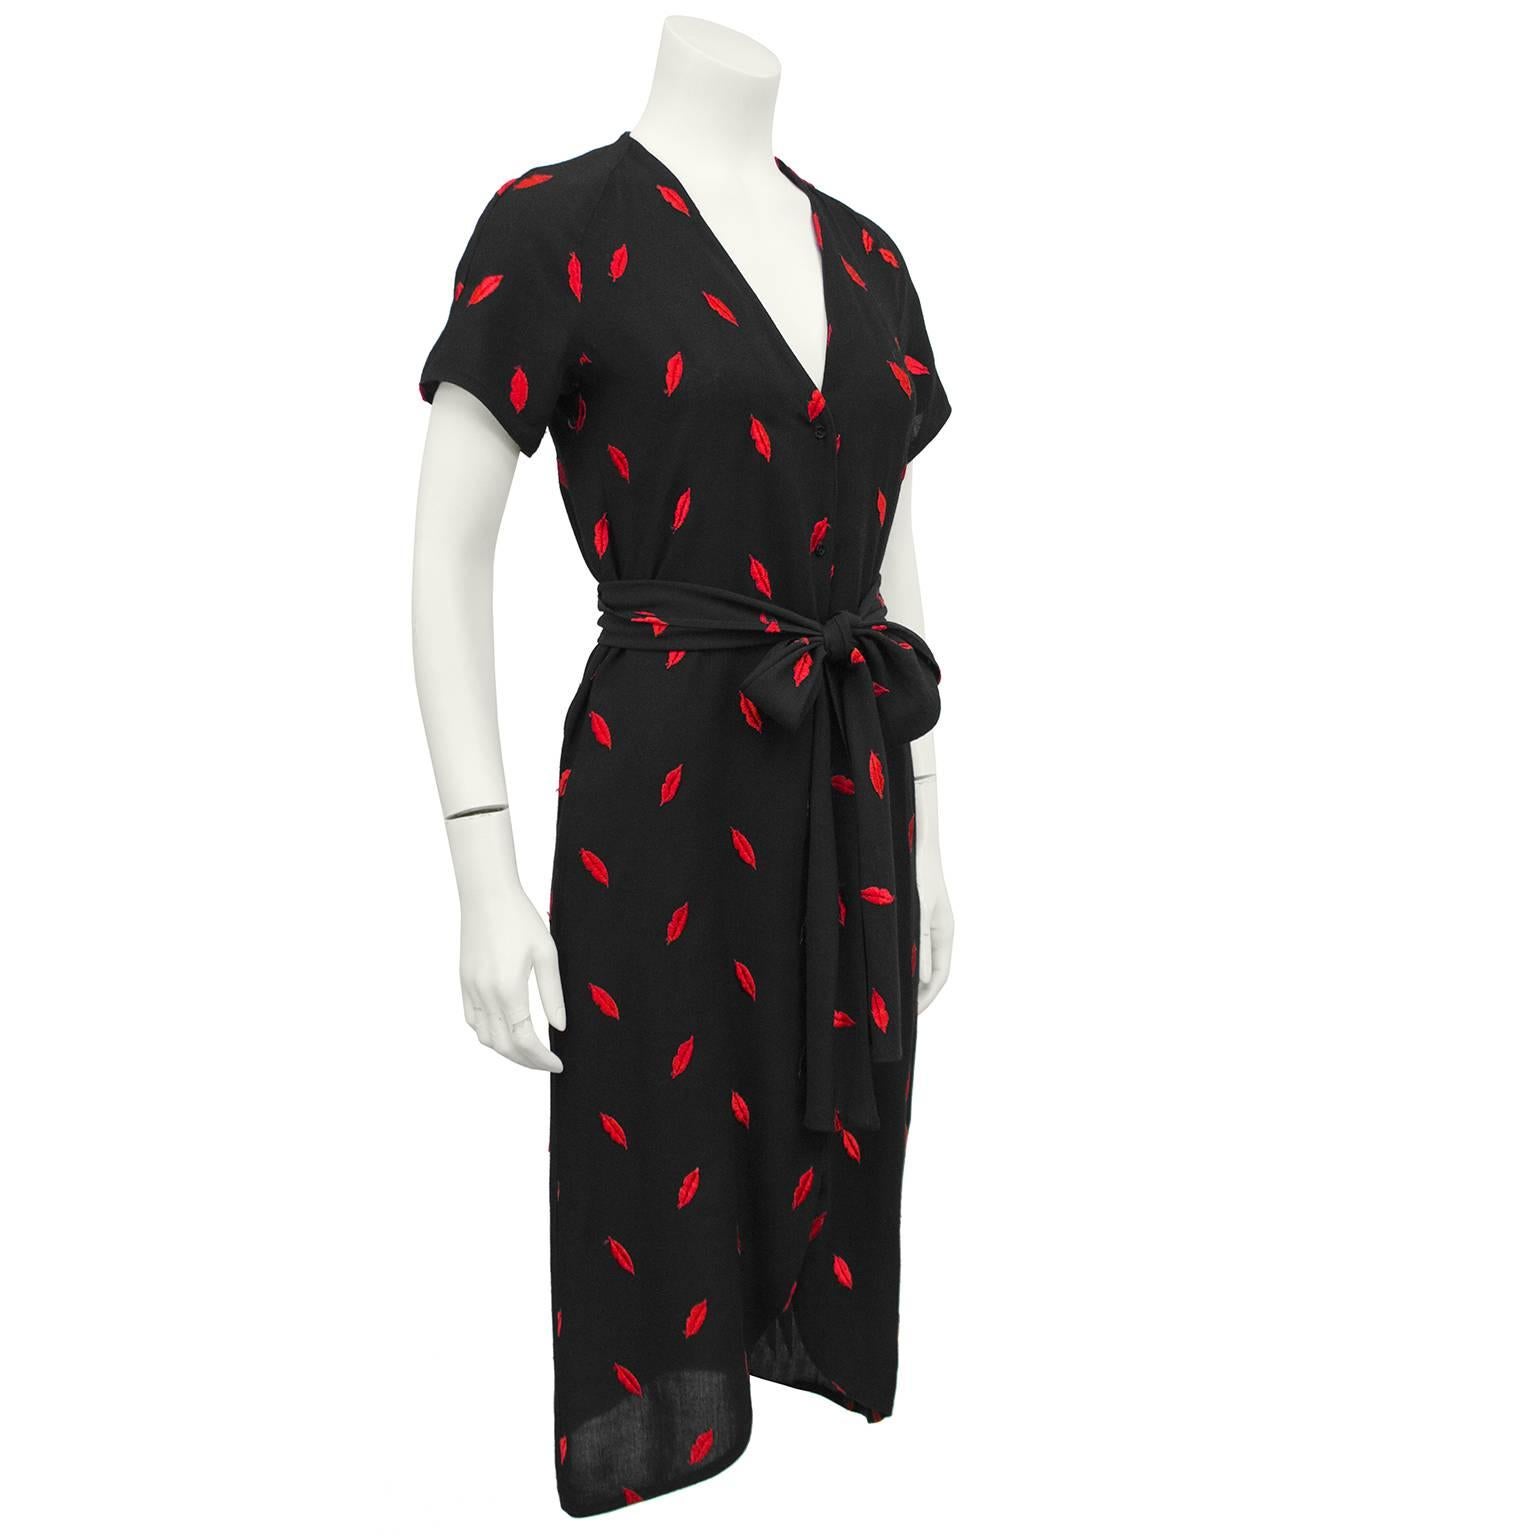 This cotton red lip printed dress by Paris fashion house Dorothee Bis is the ultimate wardrobe must have. The short sleeved, midi length dress has black buttons up the front and is accented with a wide sash belt made from the same red lip stitched